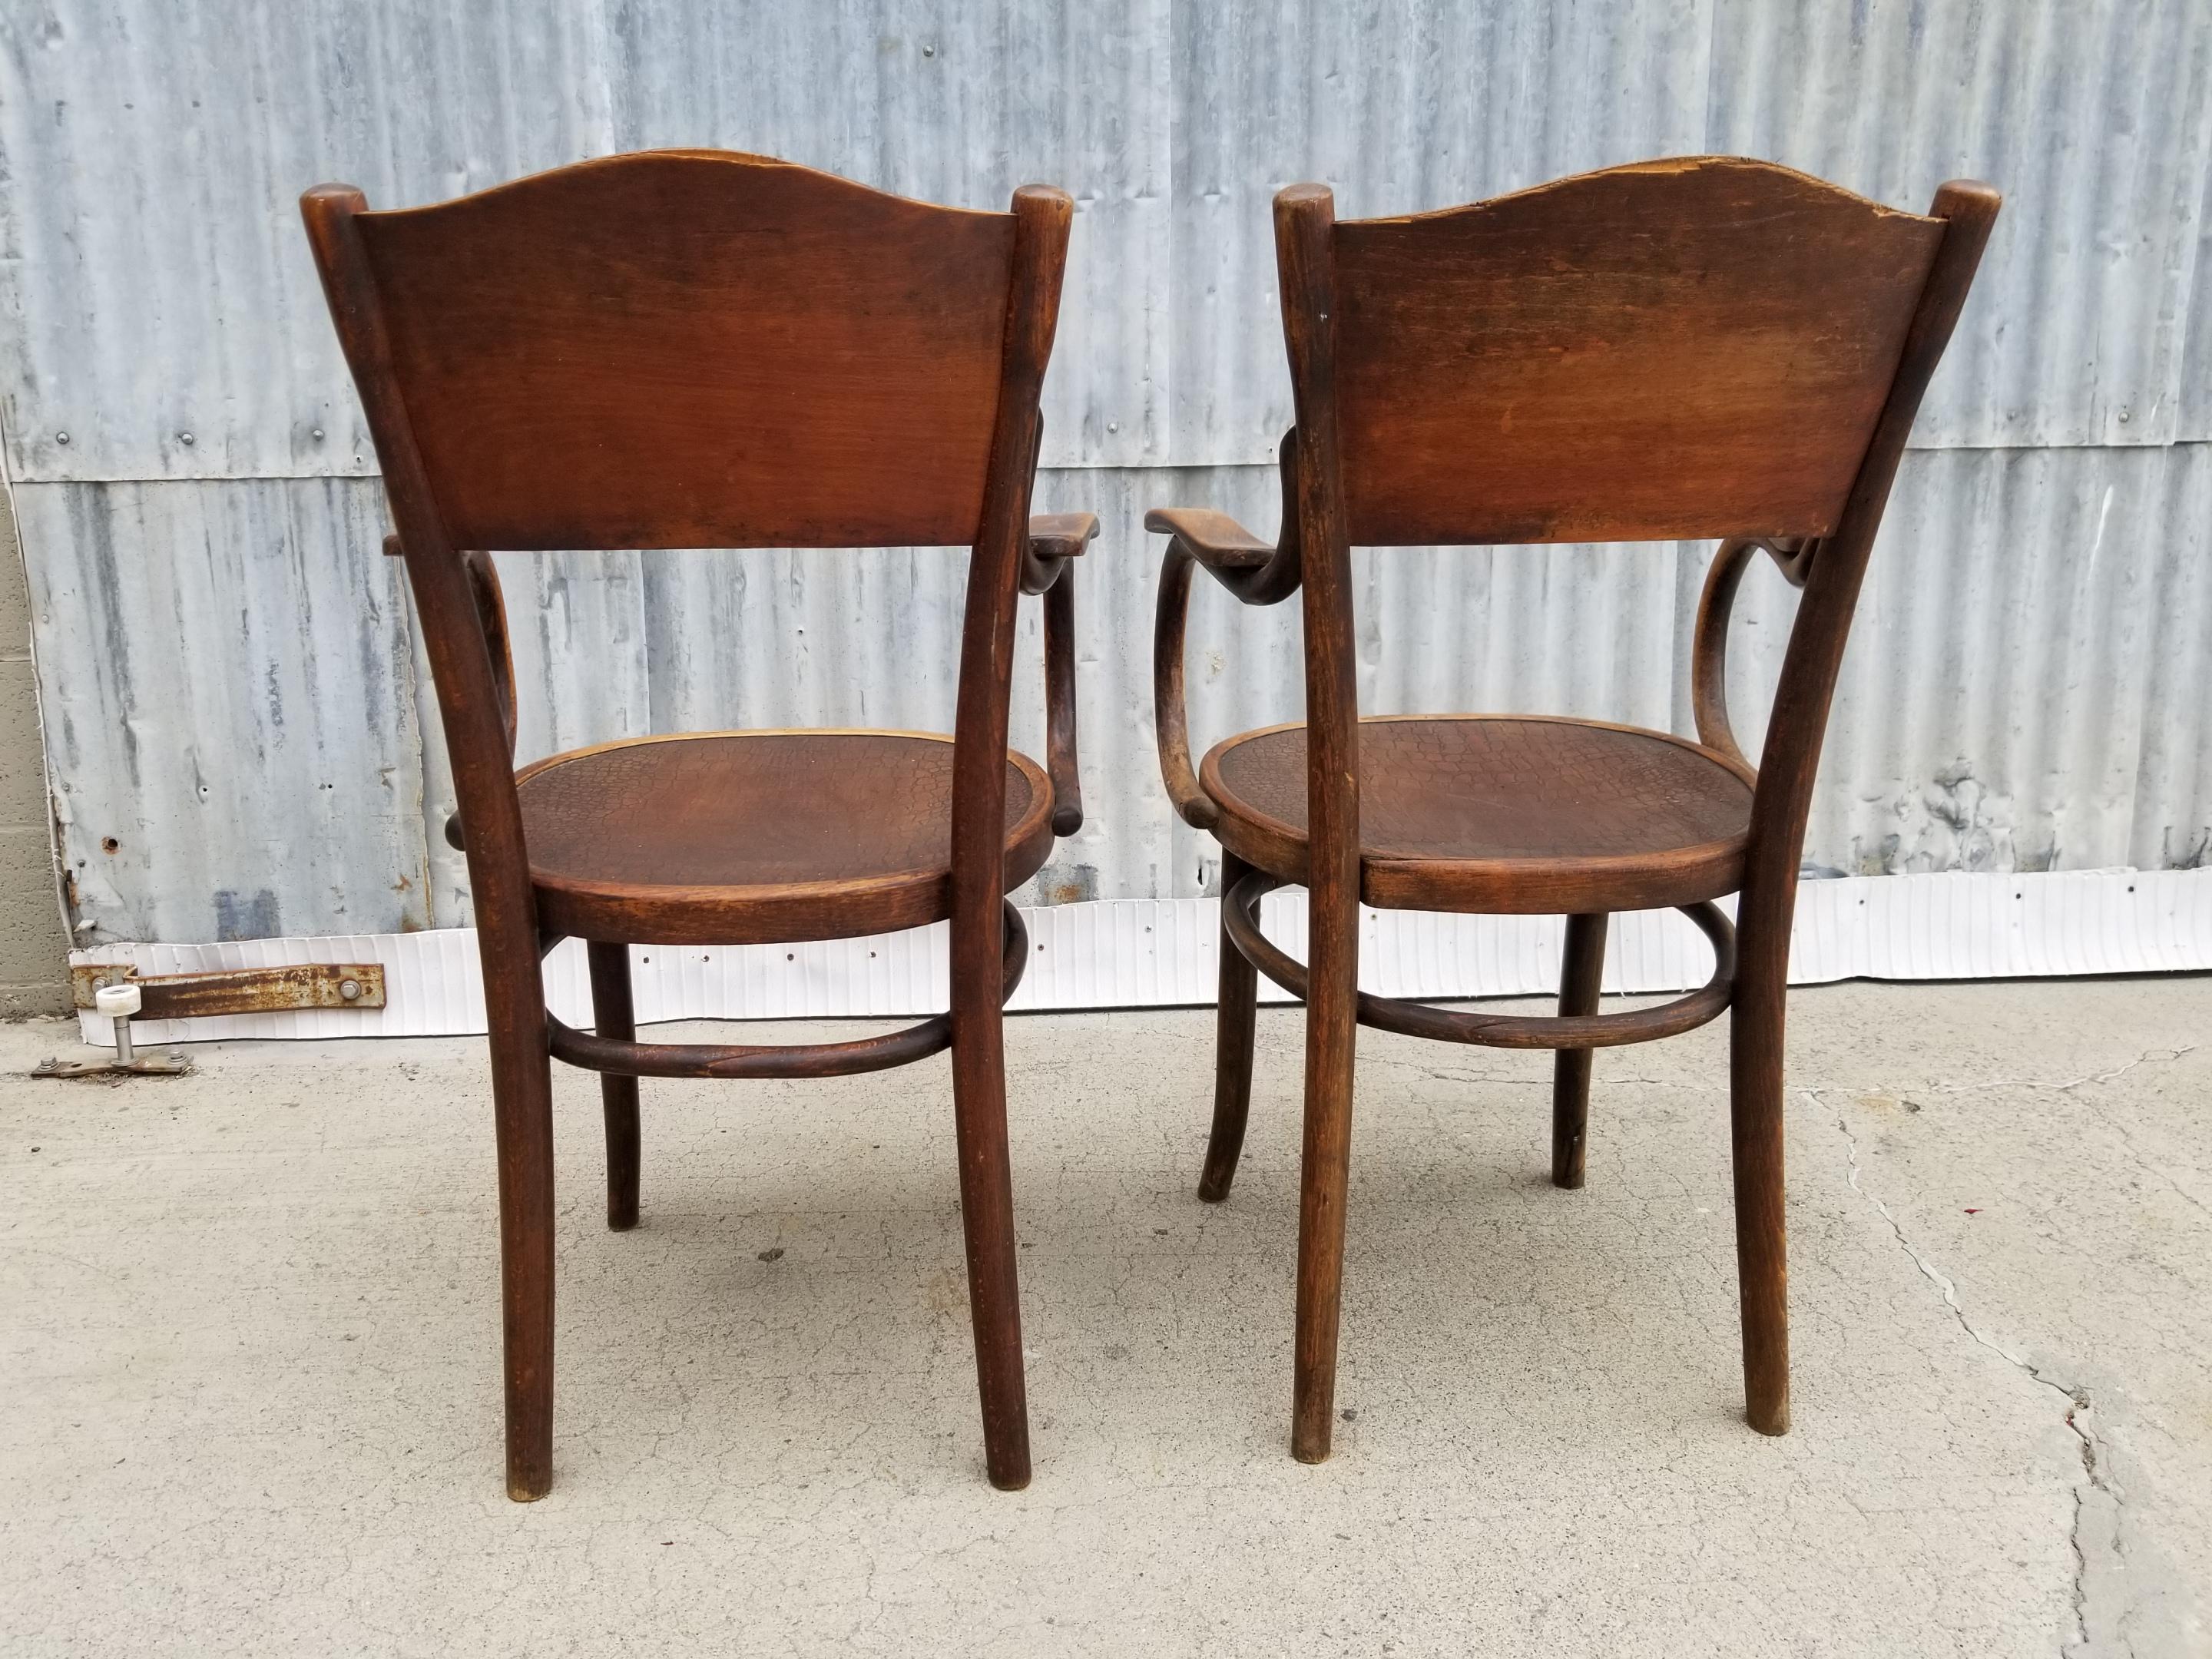 Polish Pair of Thonet Bentwood Chairs Early 20th Century